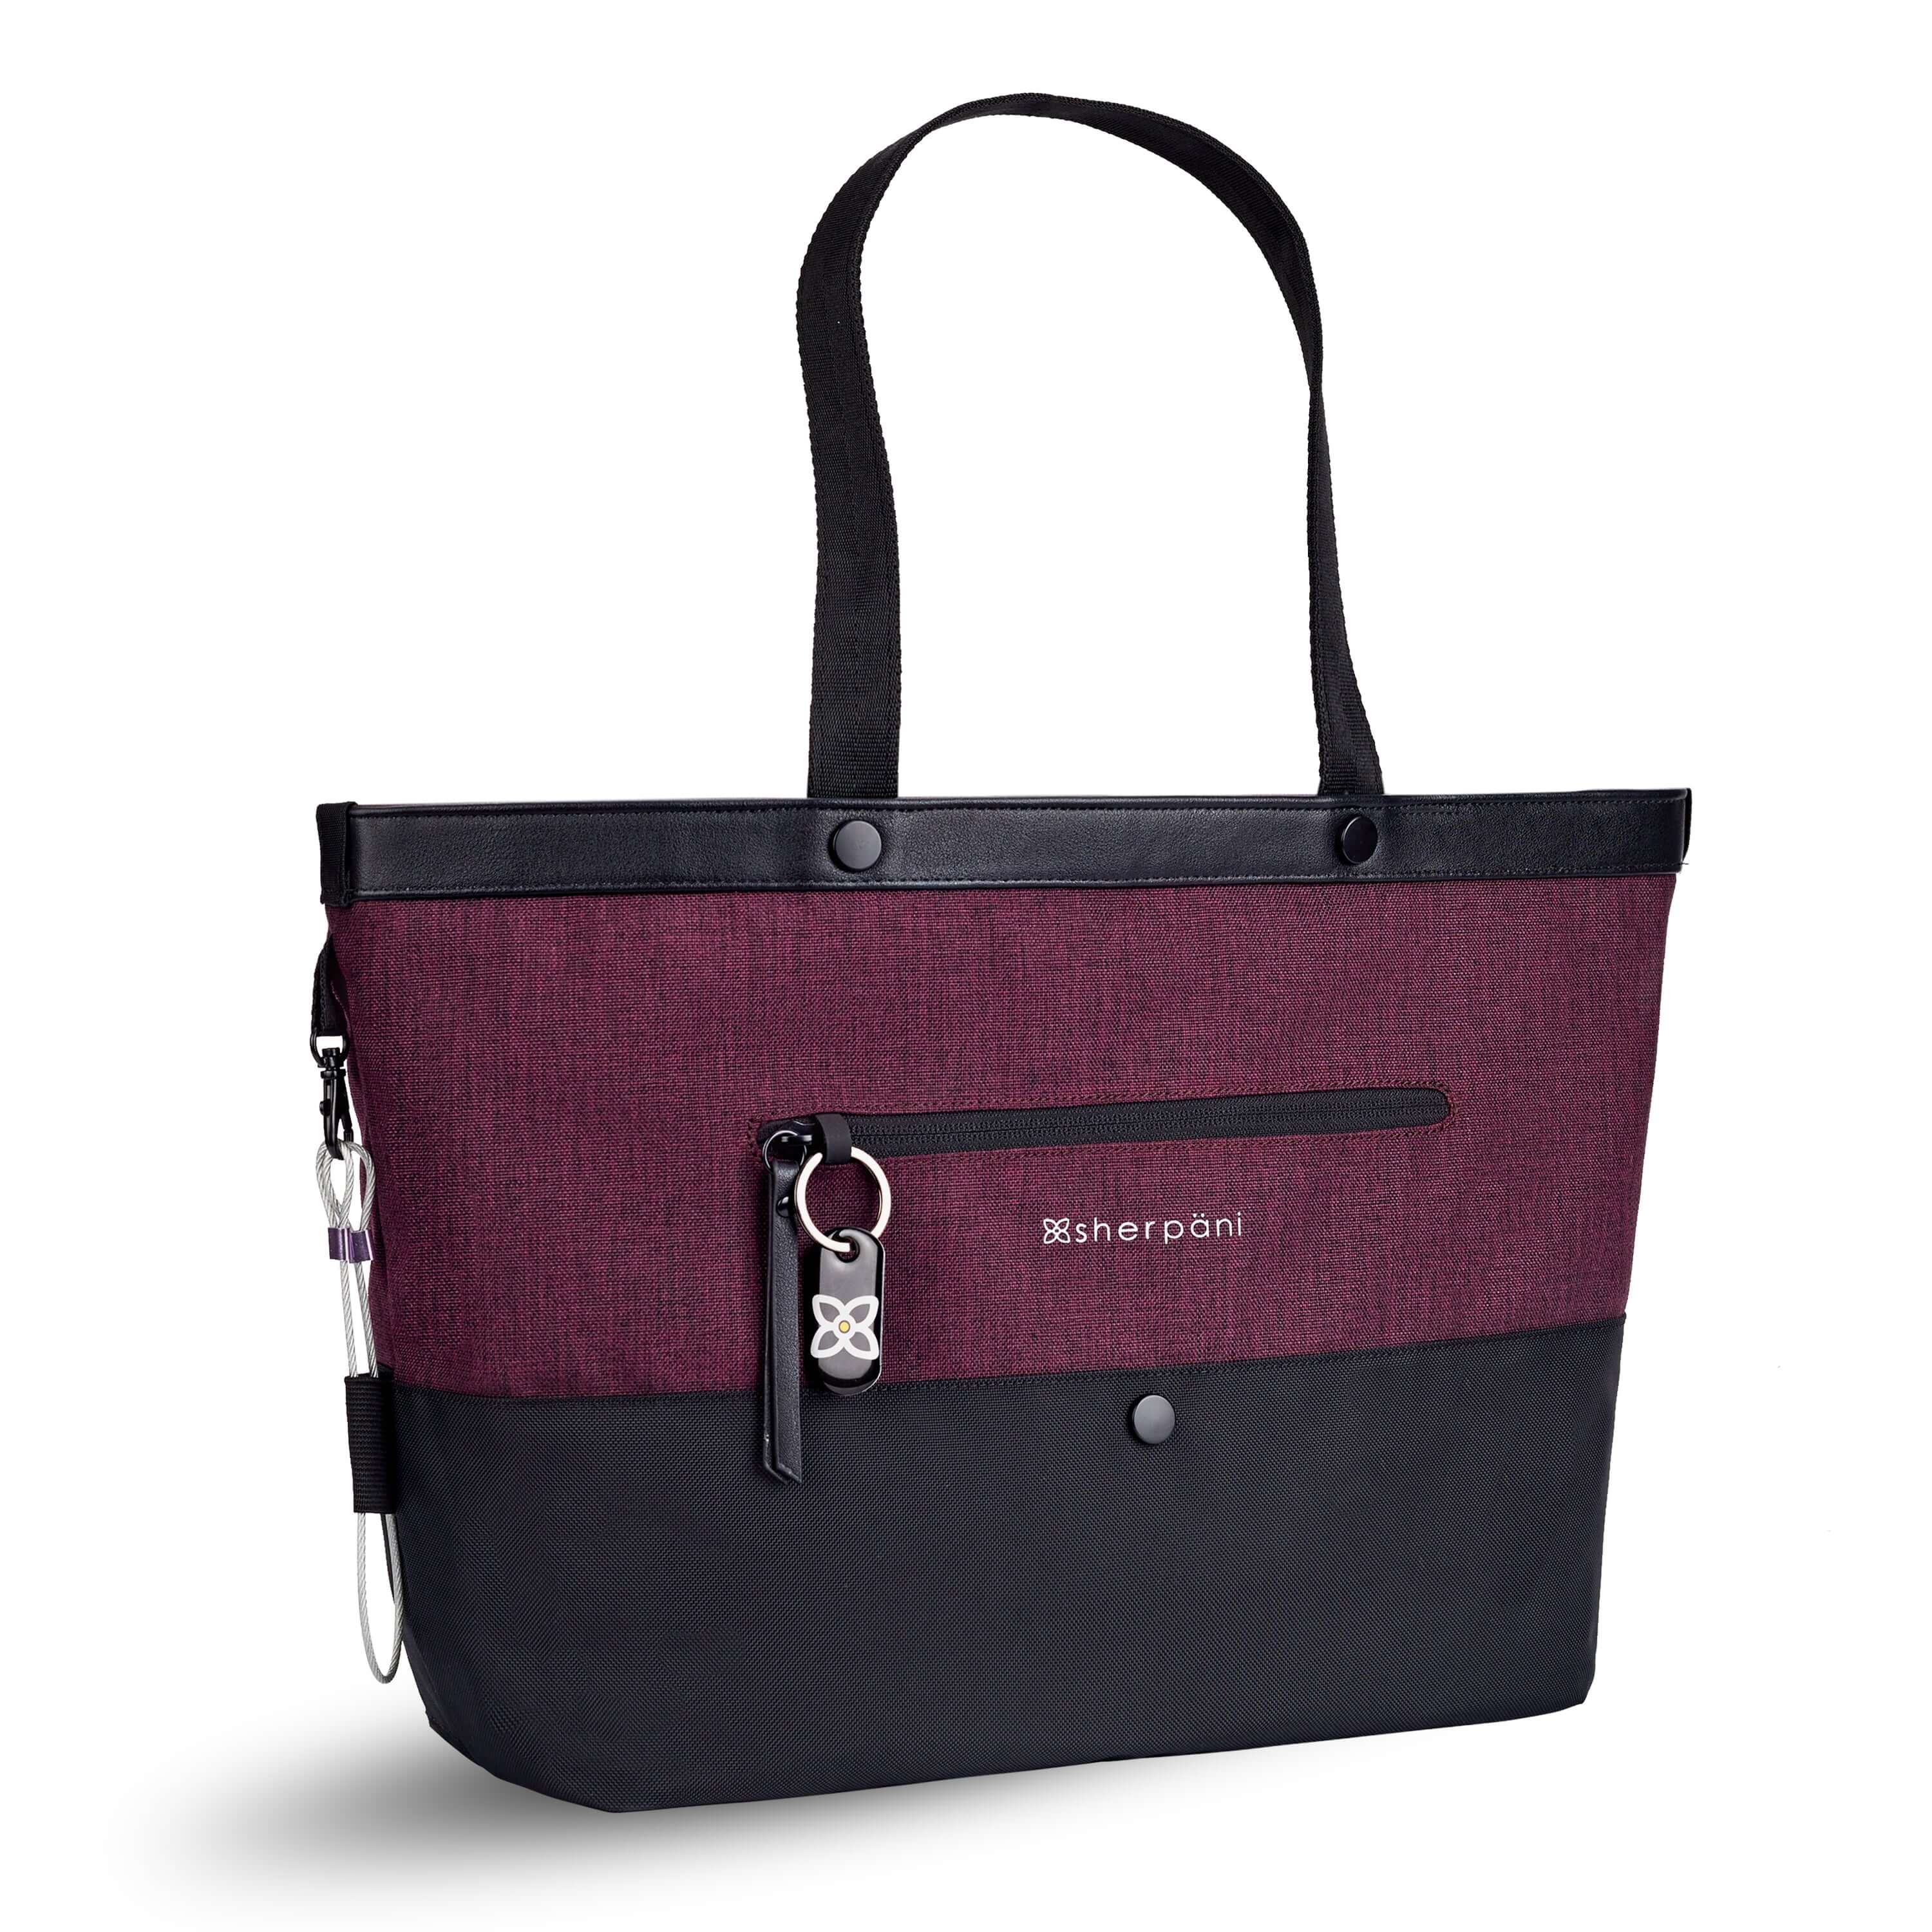 Angled front view of Sherpani's Anti-Theft tote, the Cali AT in Merlot, with vegan leather accents in black. There is an external compartment on the front of the bag with a locking zipper and ReturnMe tag. A chair loop lock is clipped to the side of the bag and is held in place by an elastic tab.